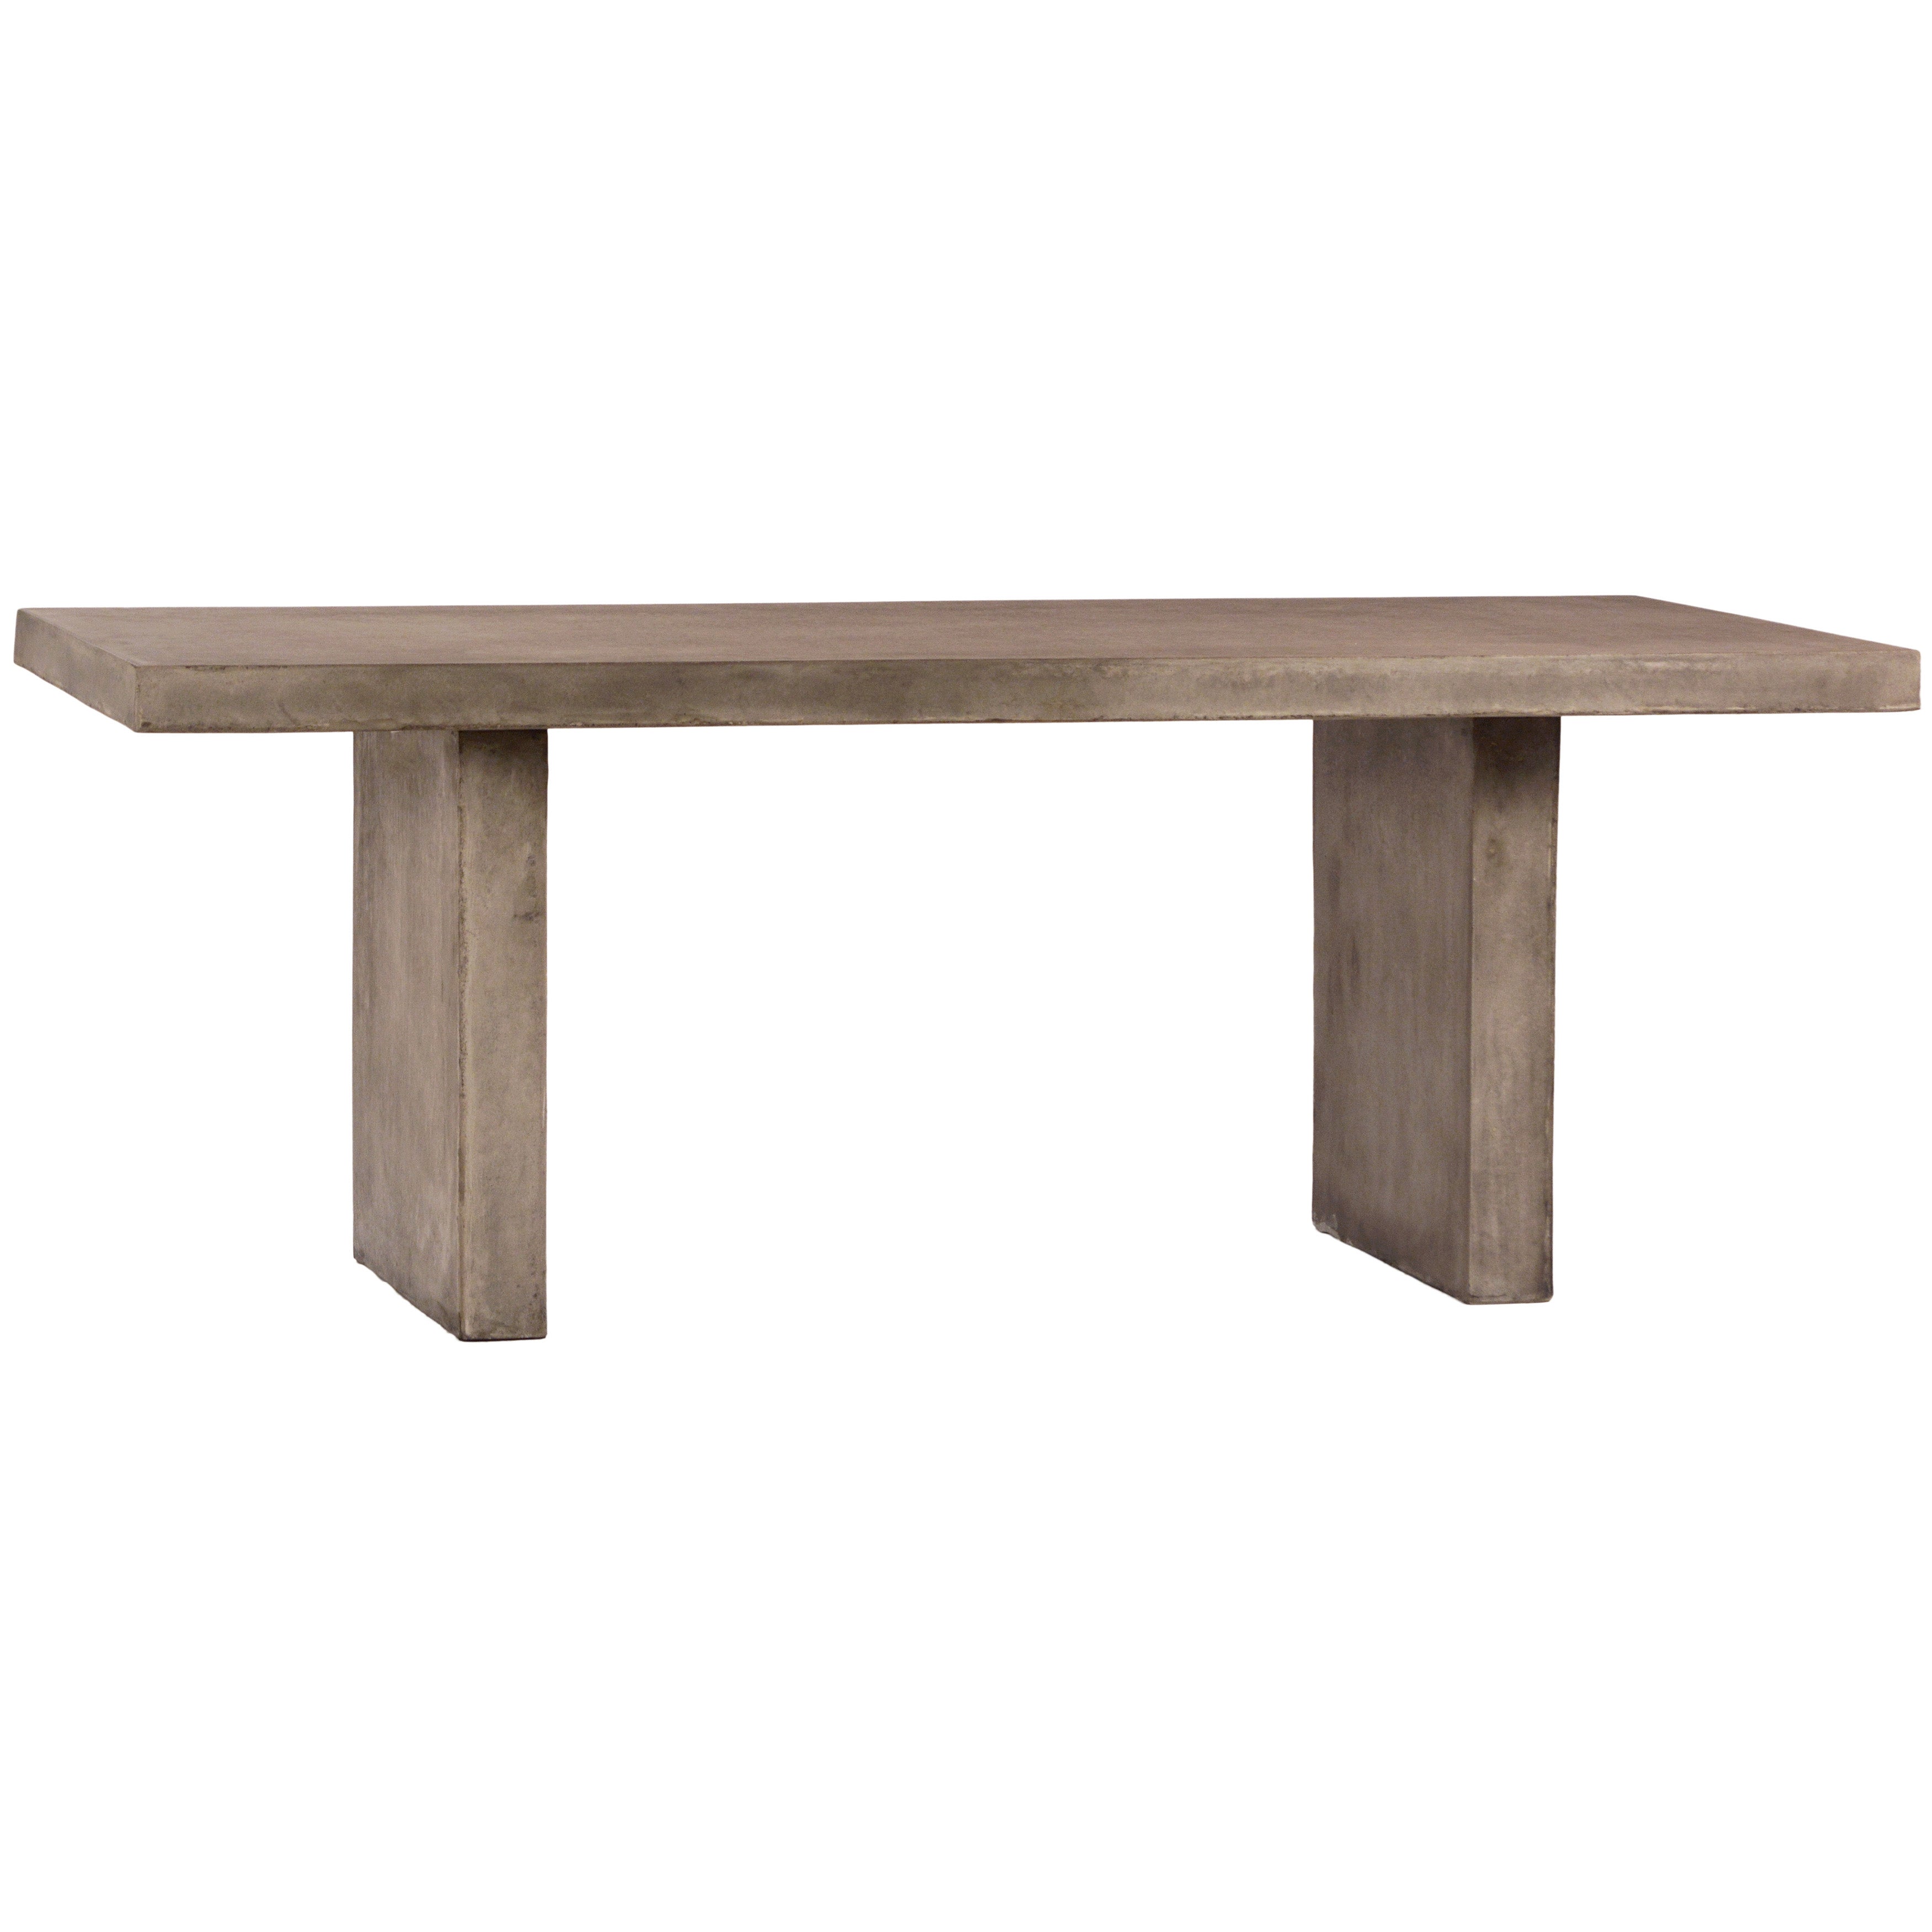 Santino Outdoor Dining Table - What A Room